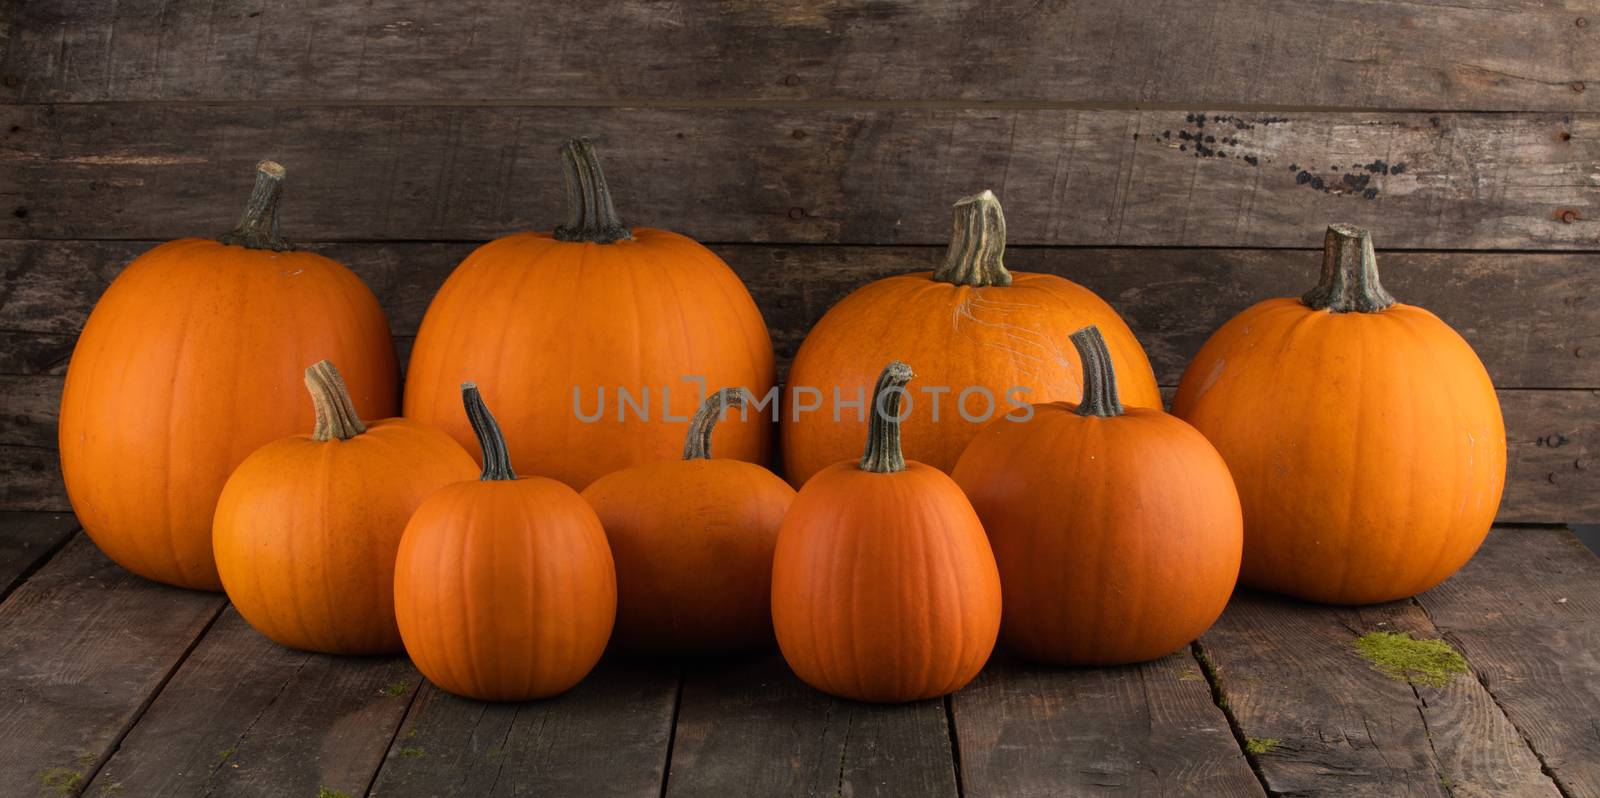 Pumpkins on old wooden background by Yellowj